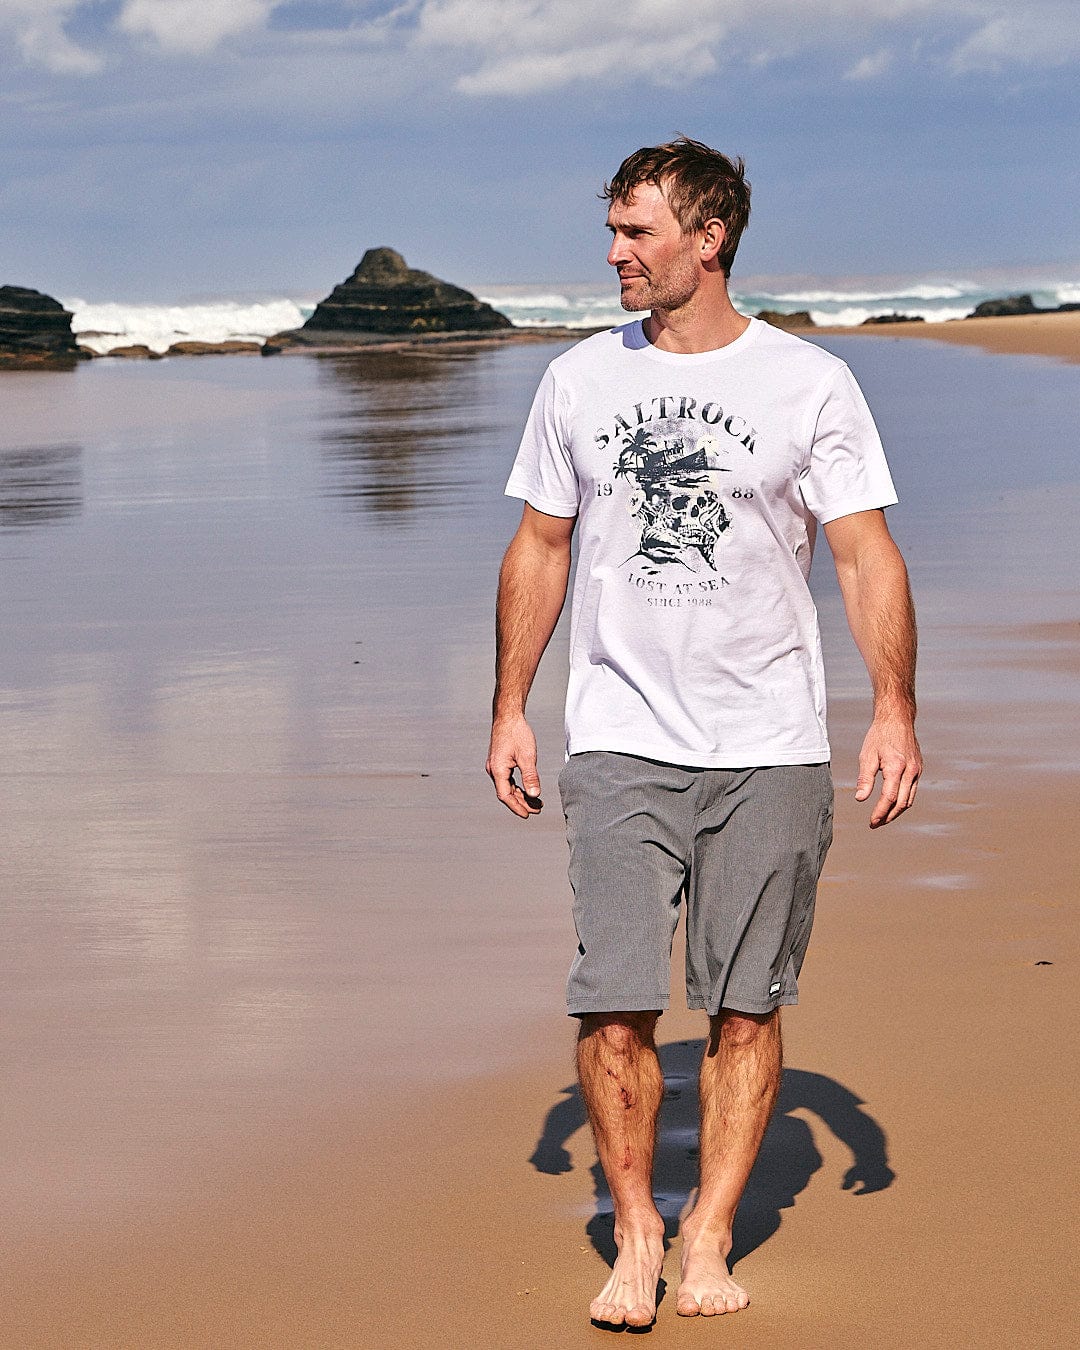 A man walking on a beach wearing the Lost At Sea Skull - Mens Short Sleeve T-Shirt in White by Saltrock.